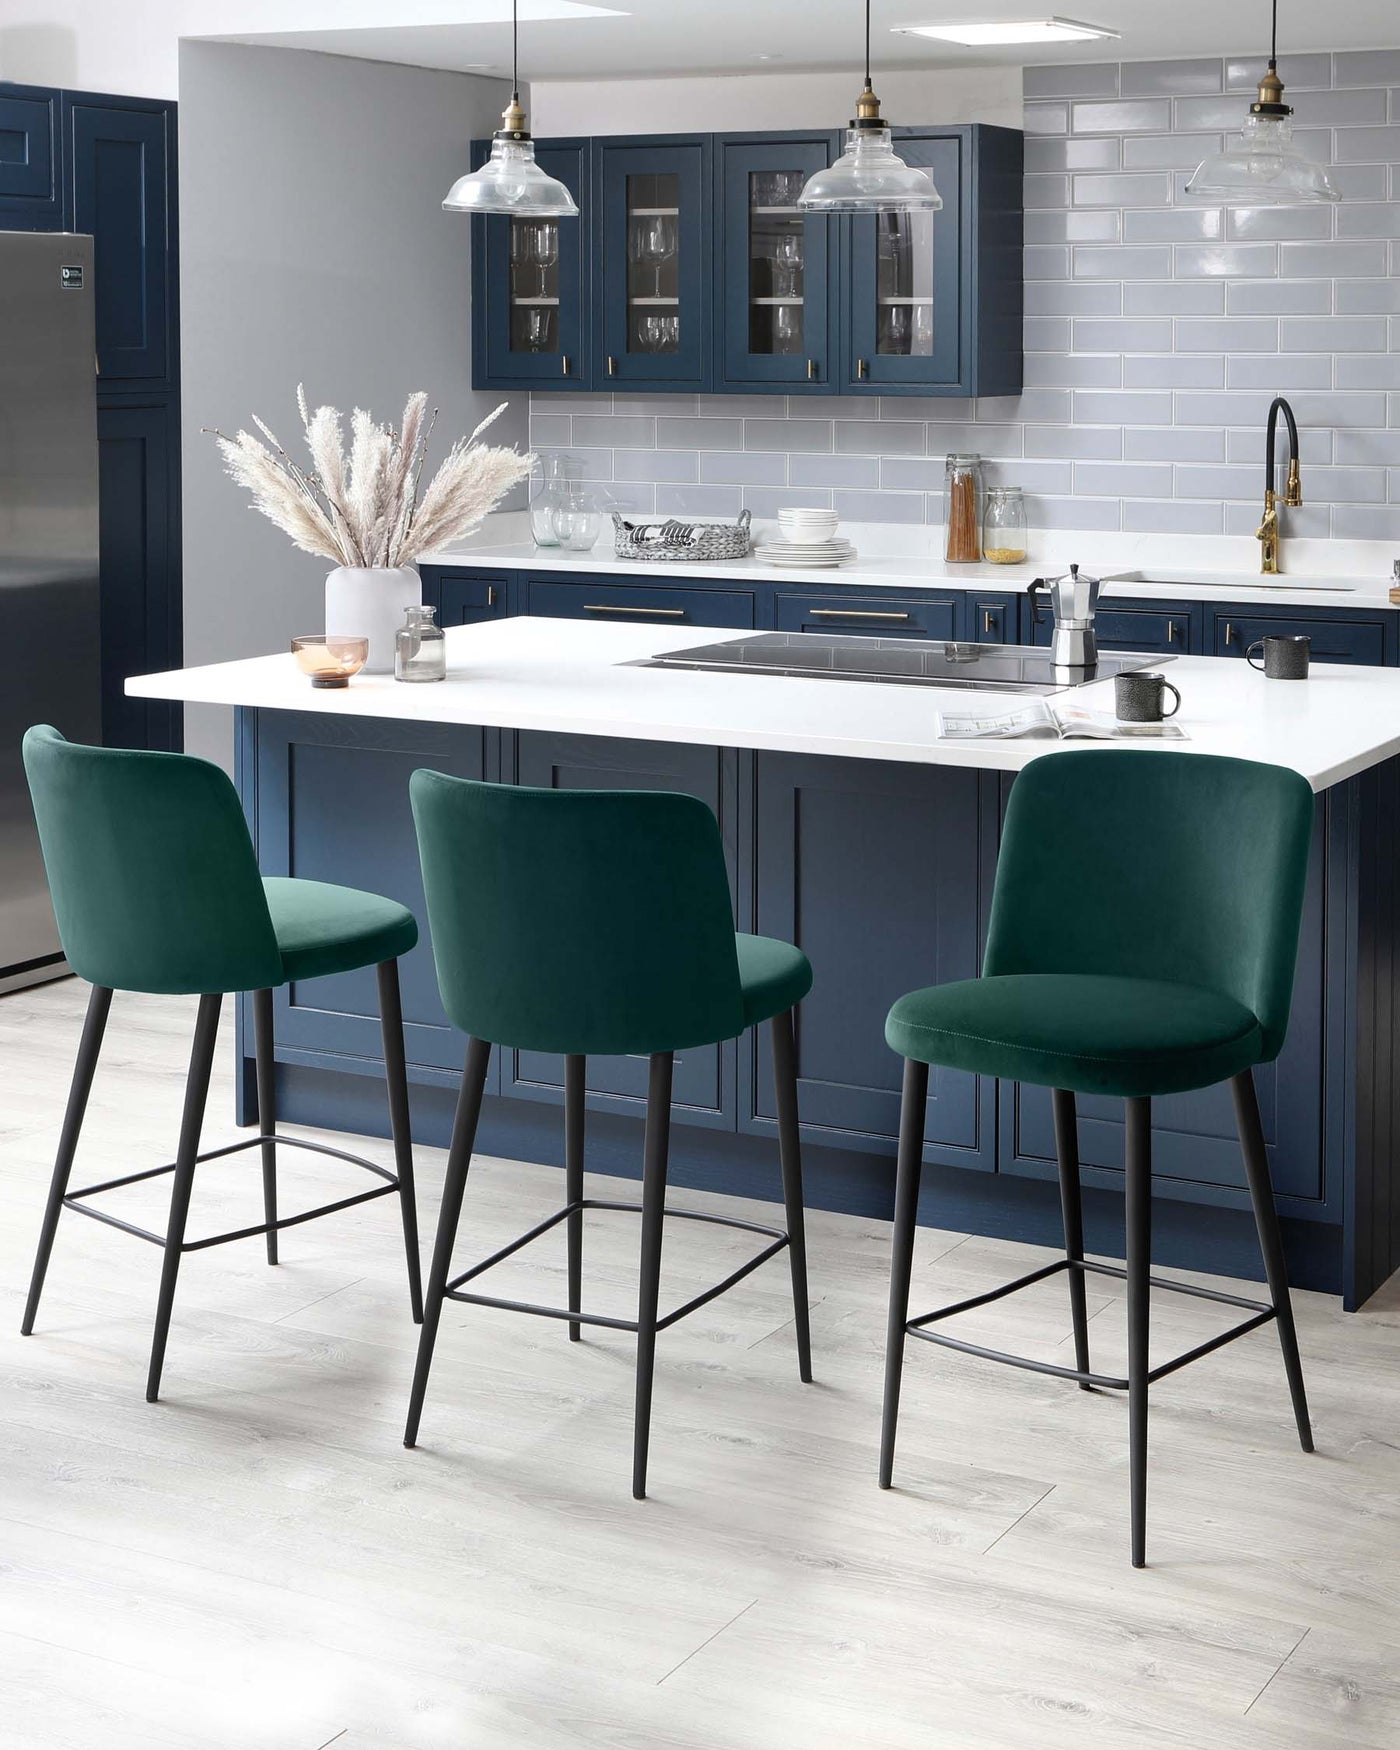 Three modern bar stools with plush, dark teal upholstery and sleek black metal legs, positioned at a white kitchen island.